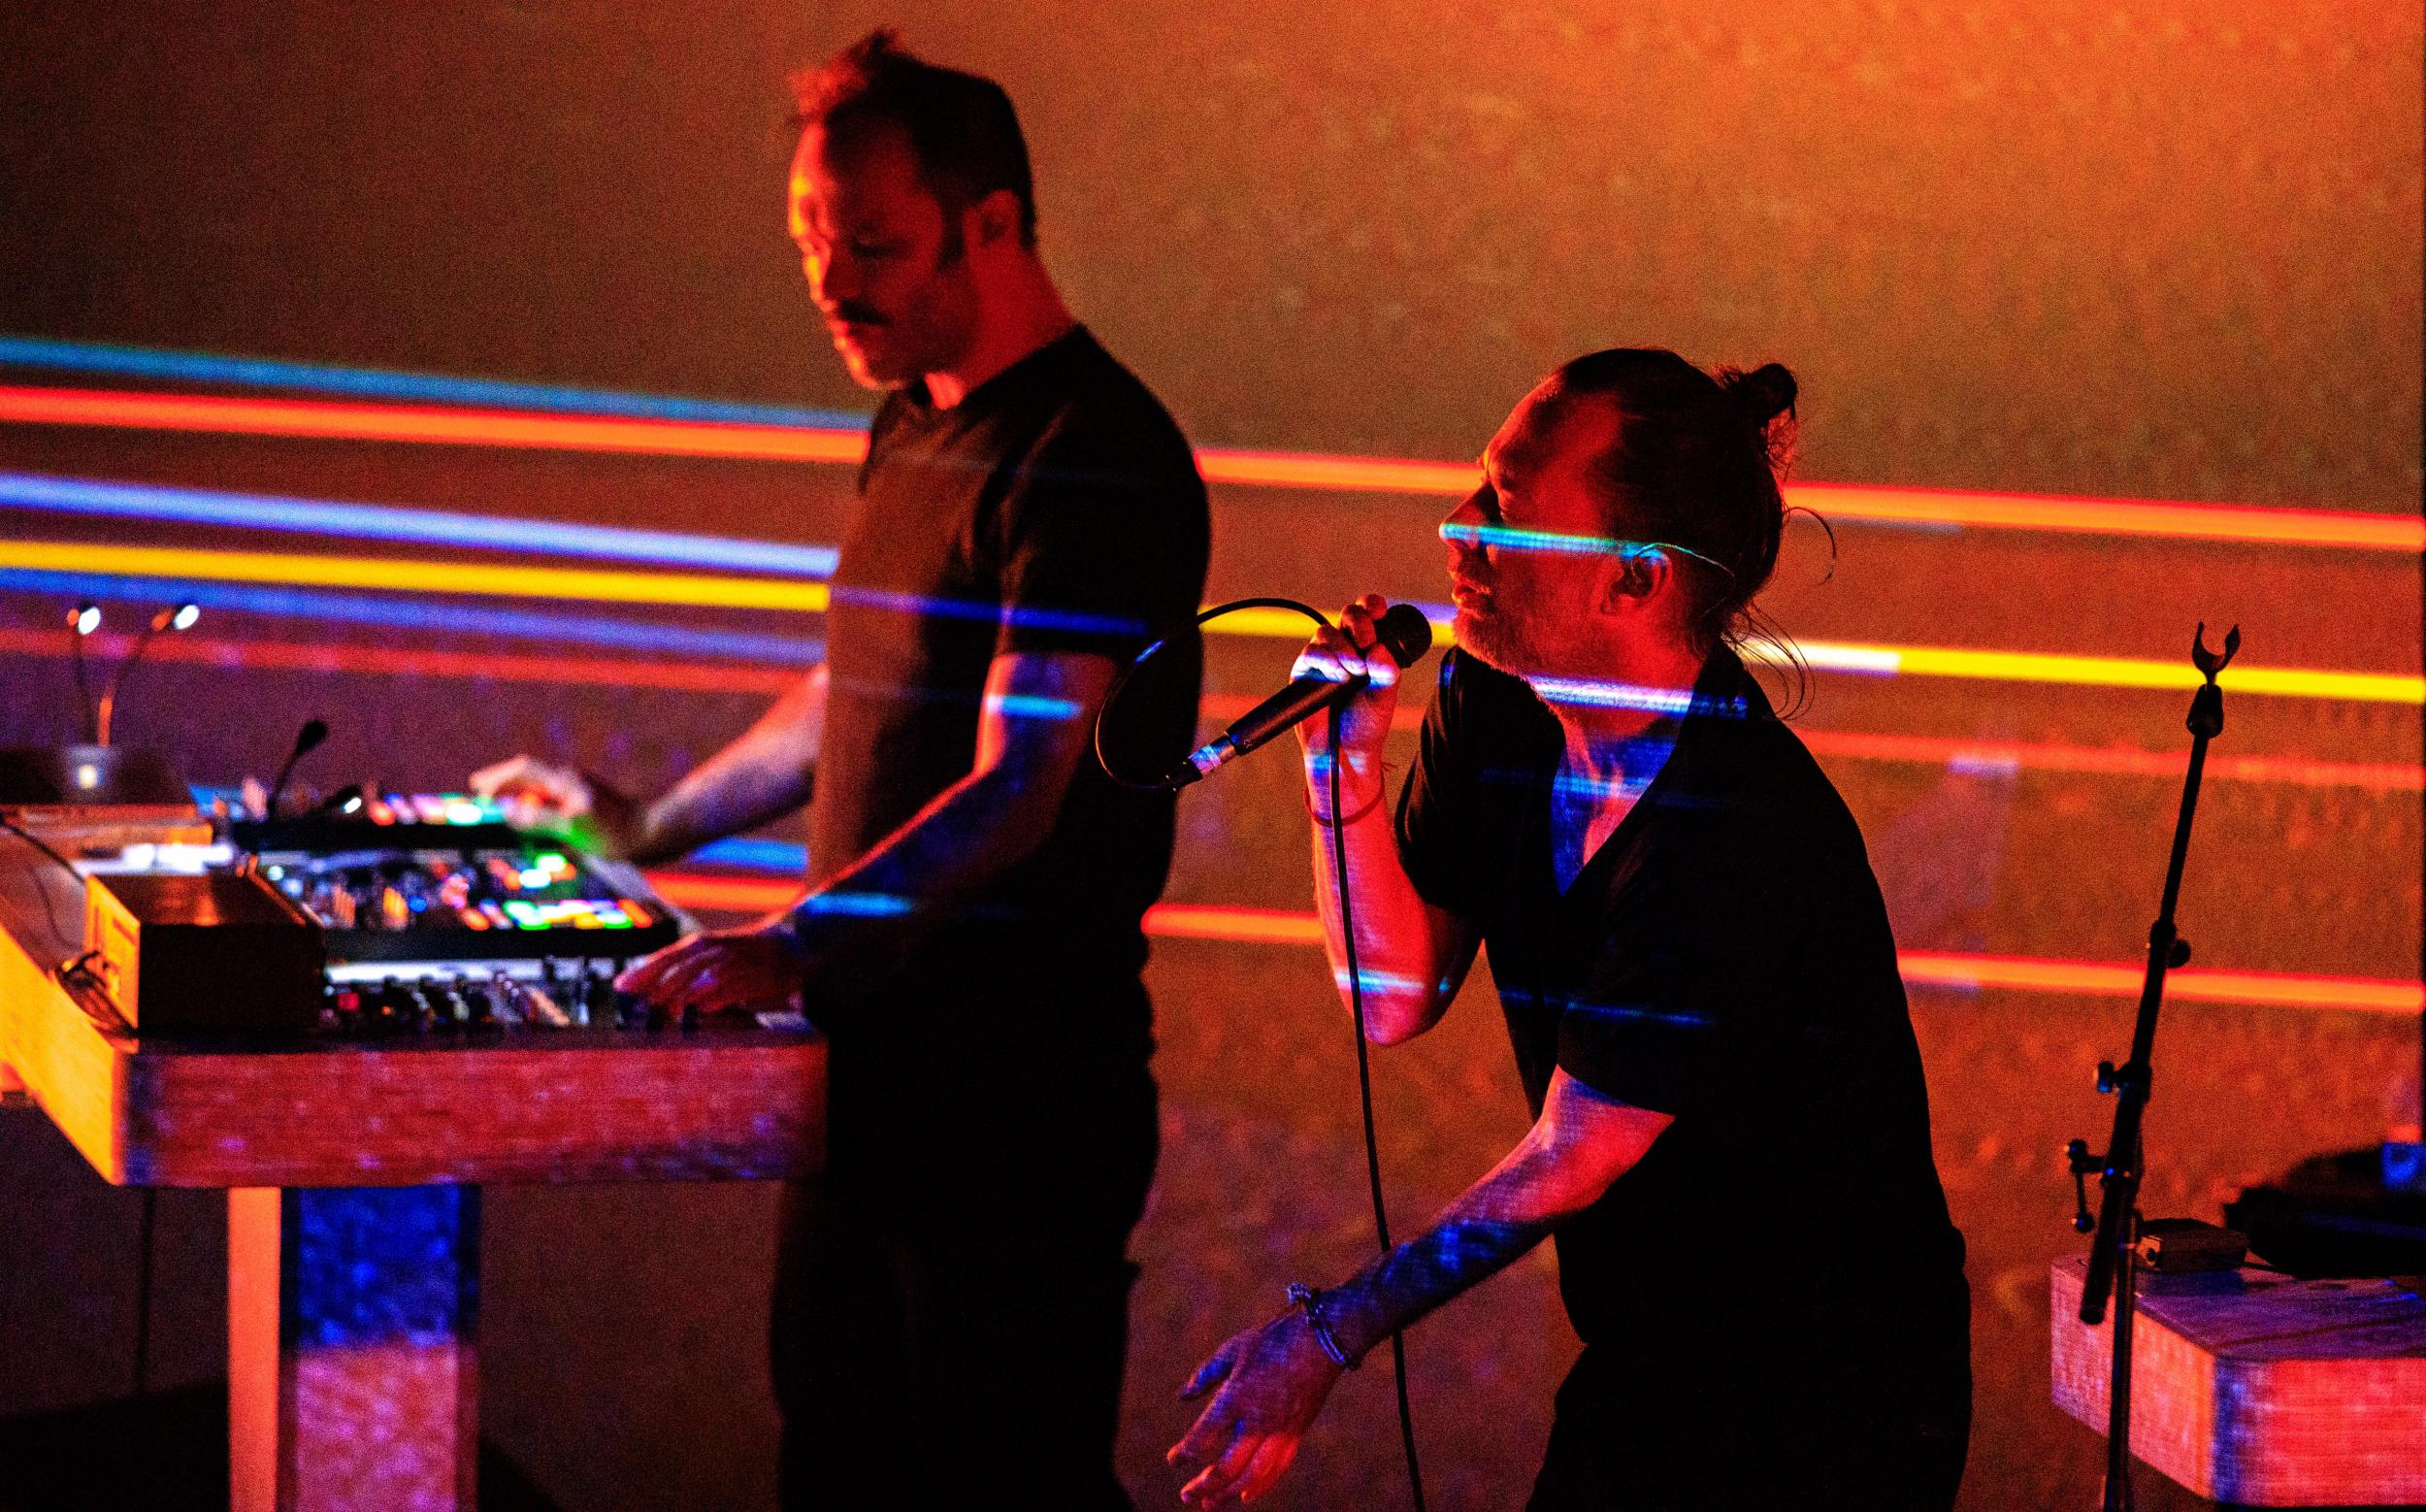 Thom Yorke performs his solo tour with Nigel Godrich